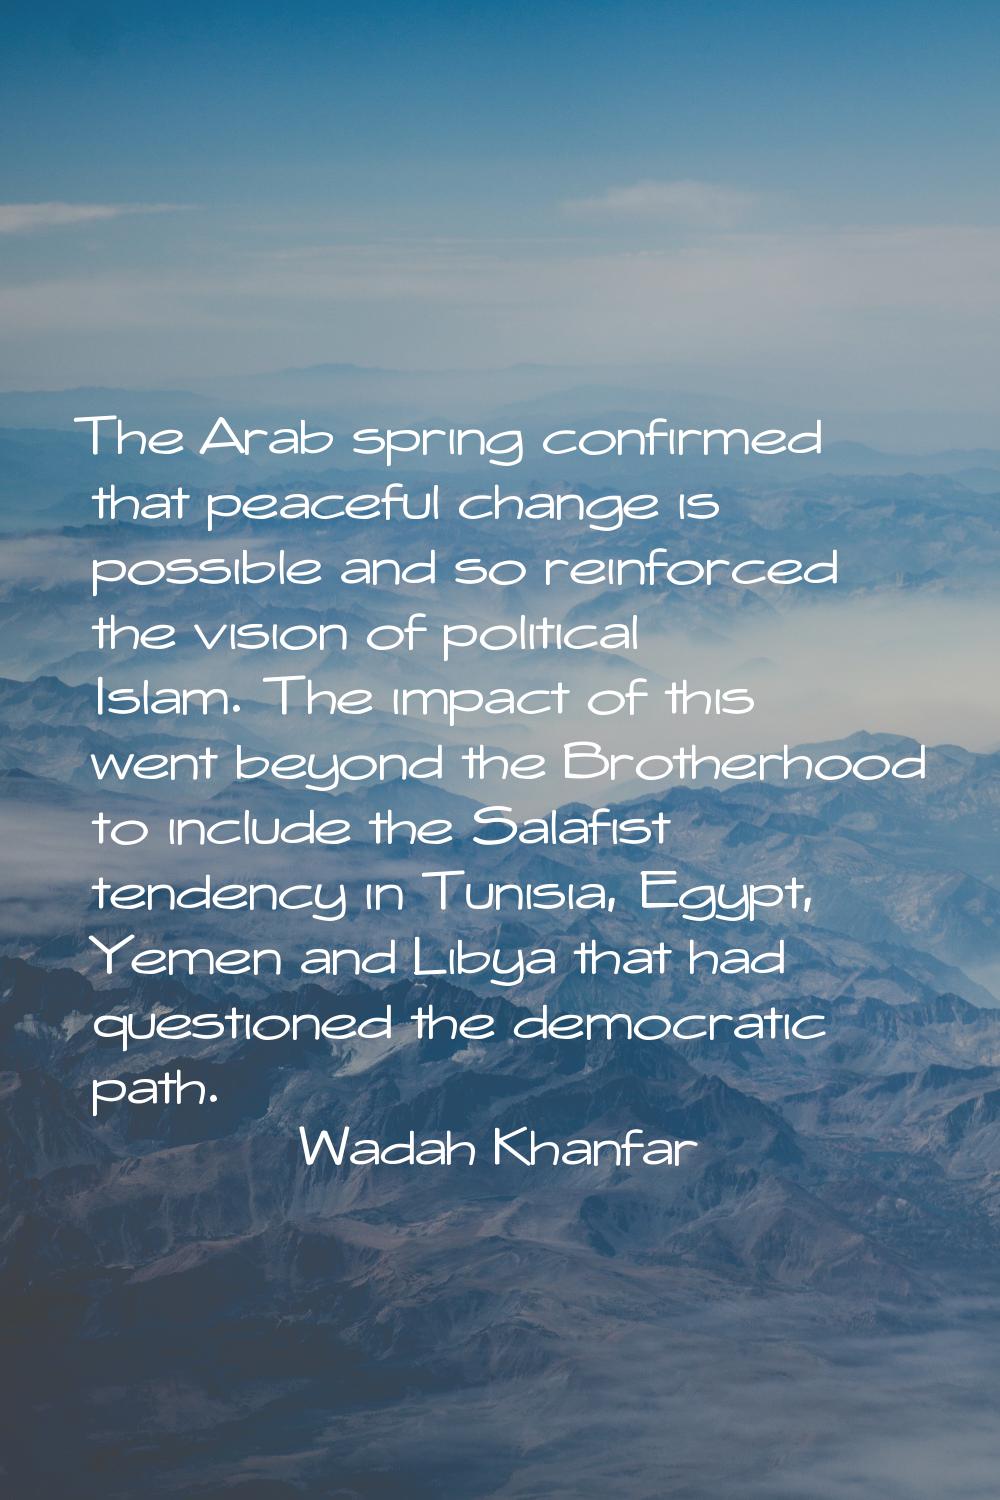 The Arab spring confirmed that peaceful change is possible and so reinforced the vision of politica